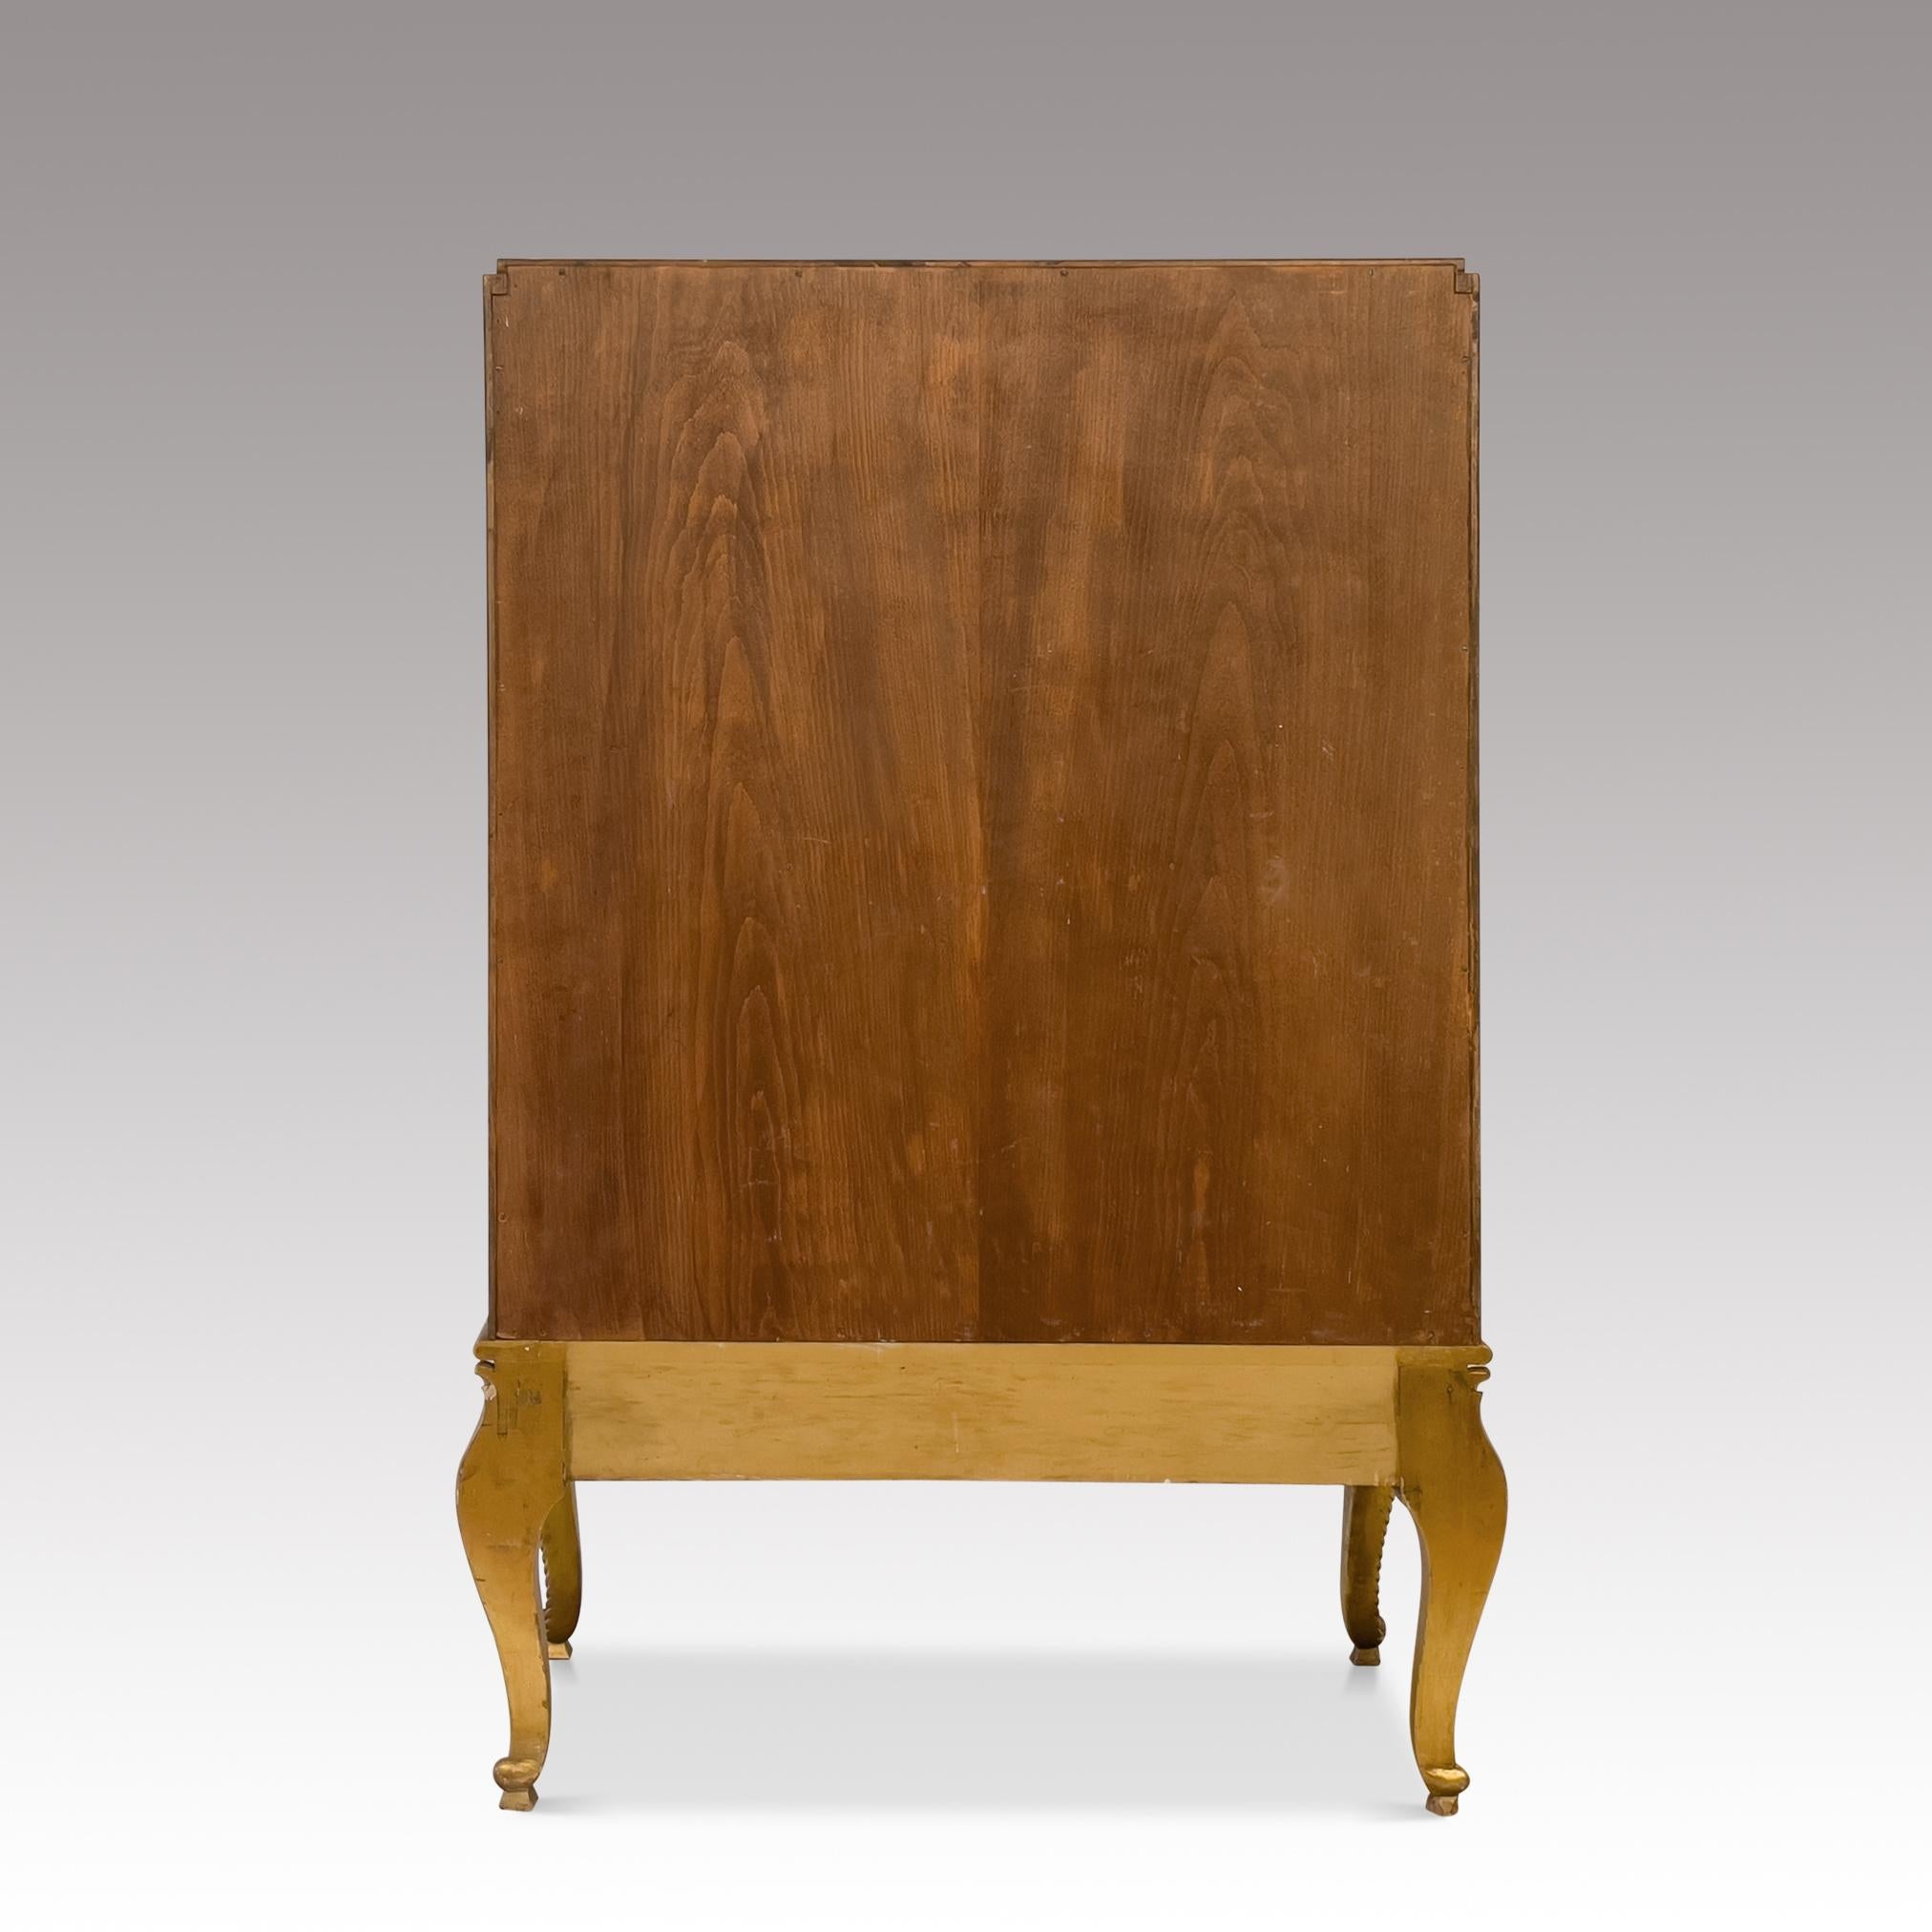 Wonderful Art Deco Cabinet designed by Maurice Dufrene and manufactured by La Maitrise around 1940. The cabinet is made from rosewood and has mother of pearl inlays.

Rosewood-veneered cabinet on carved and gilt base; folding doors with marquetry